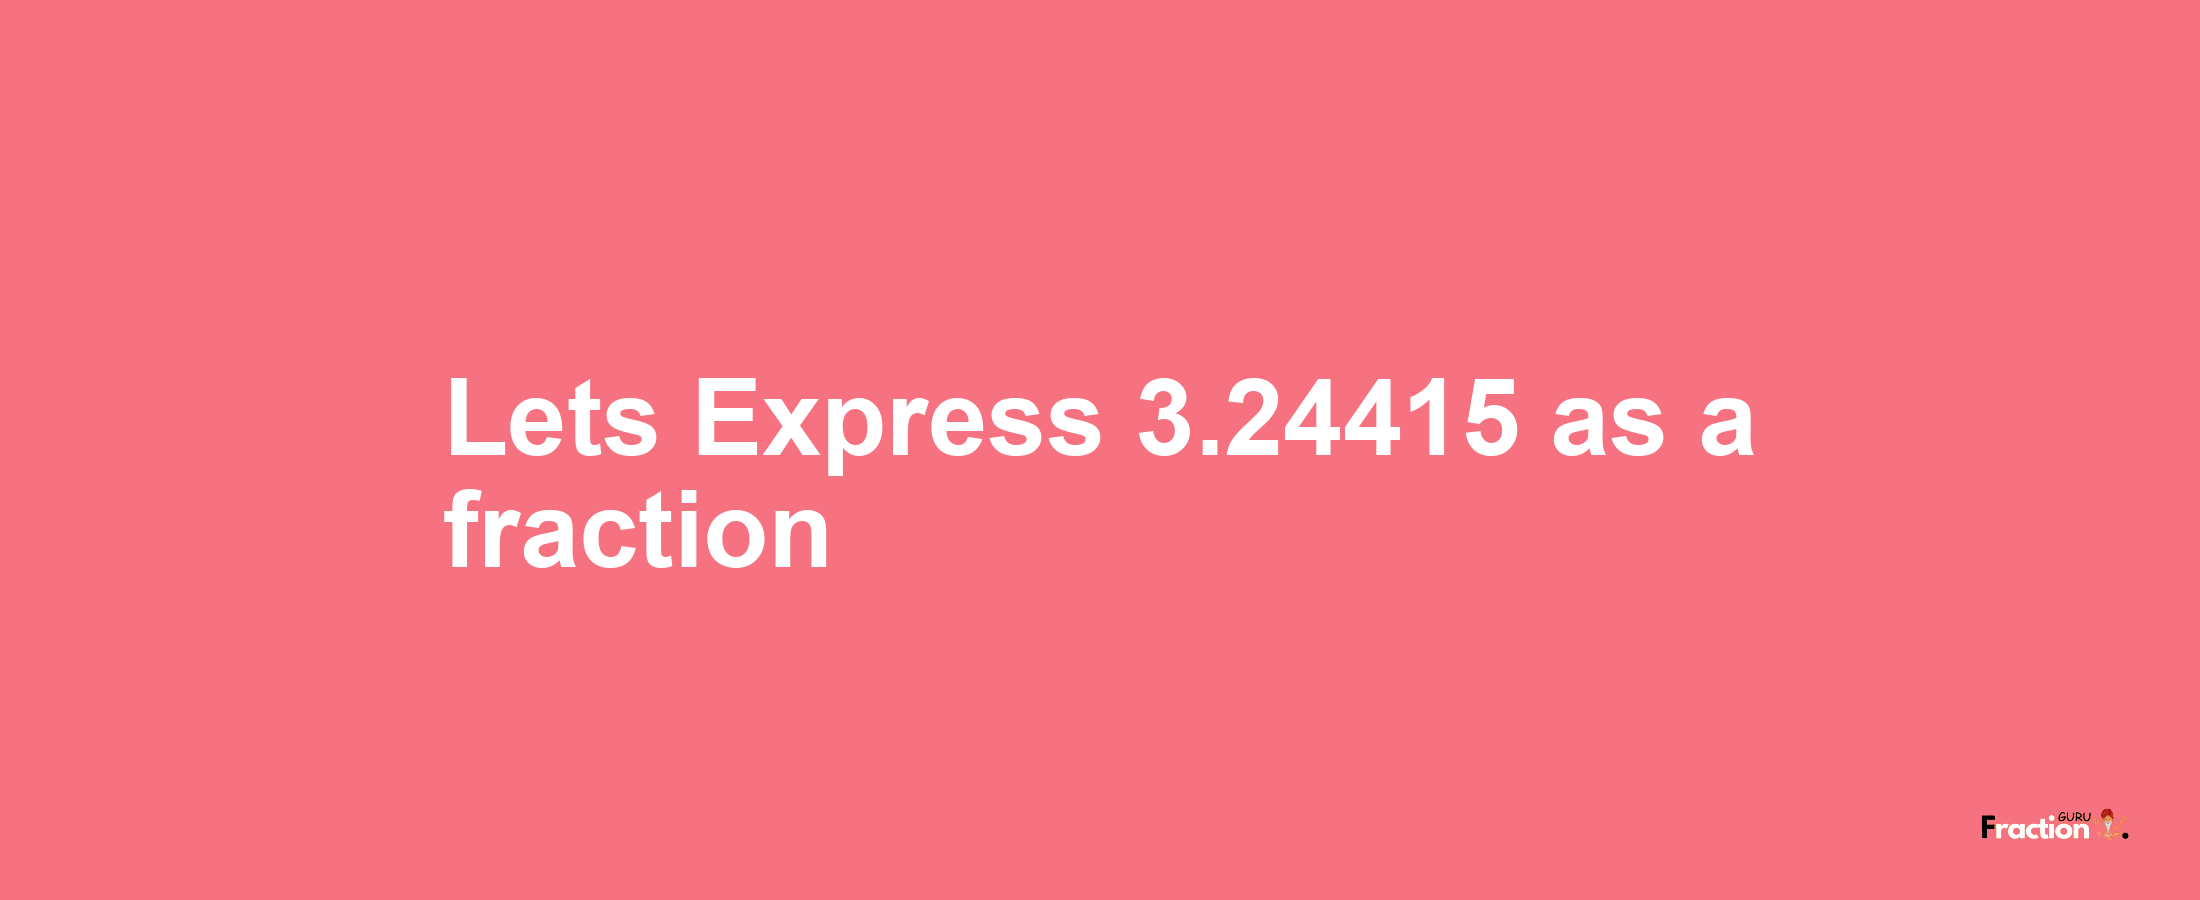 Lets Express 3.24415 as afraction